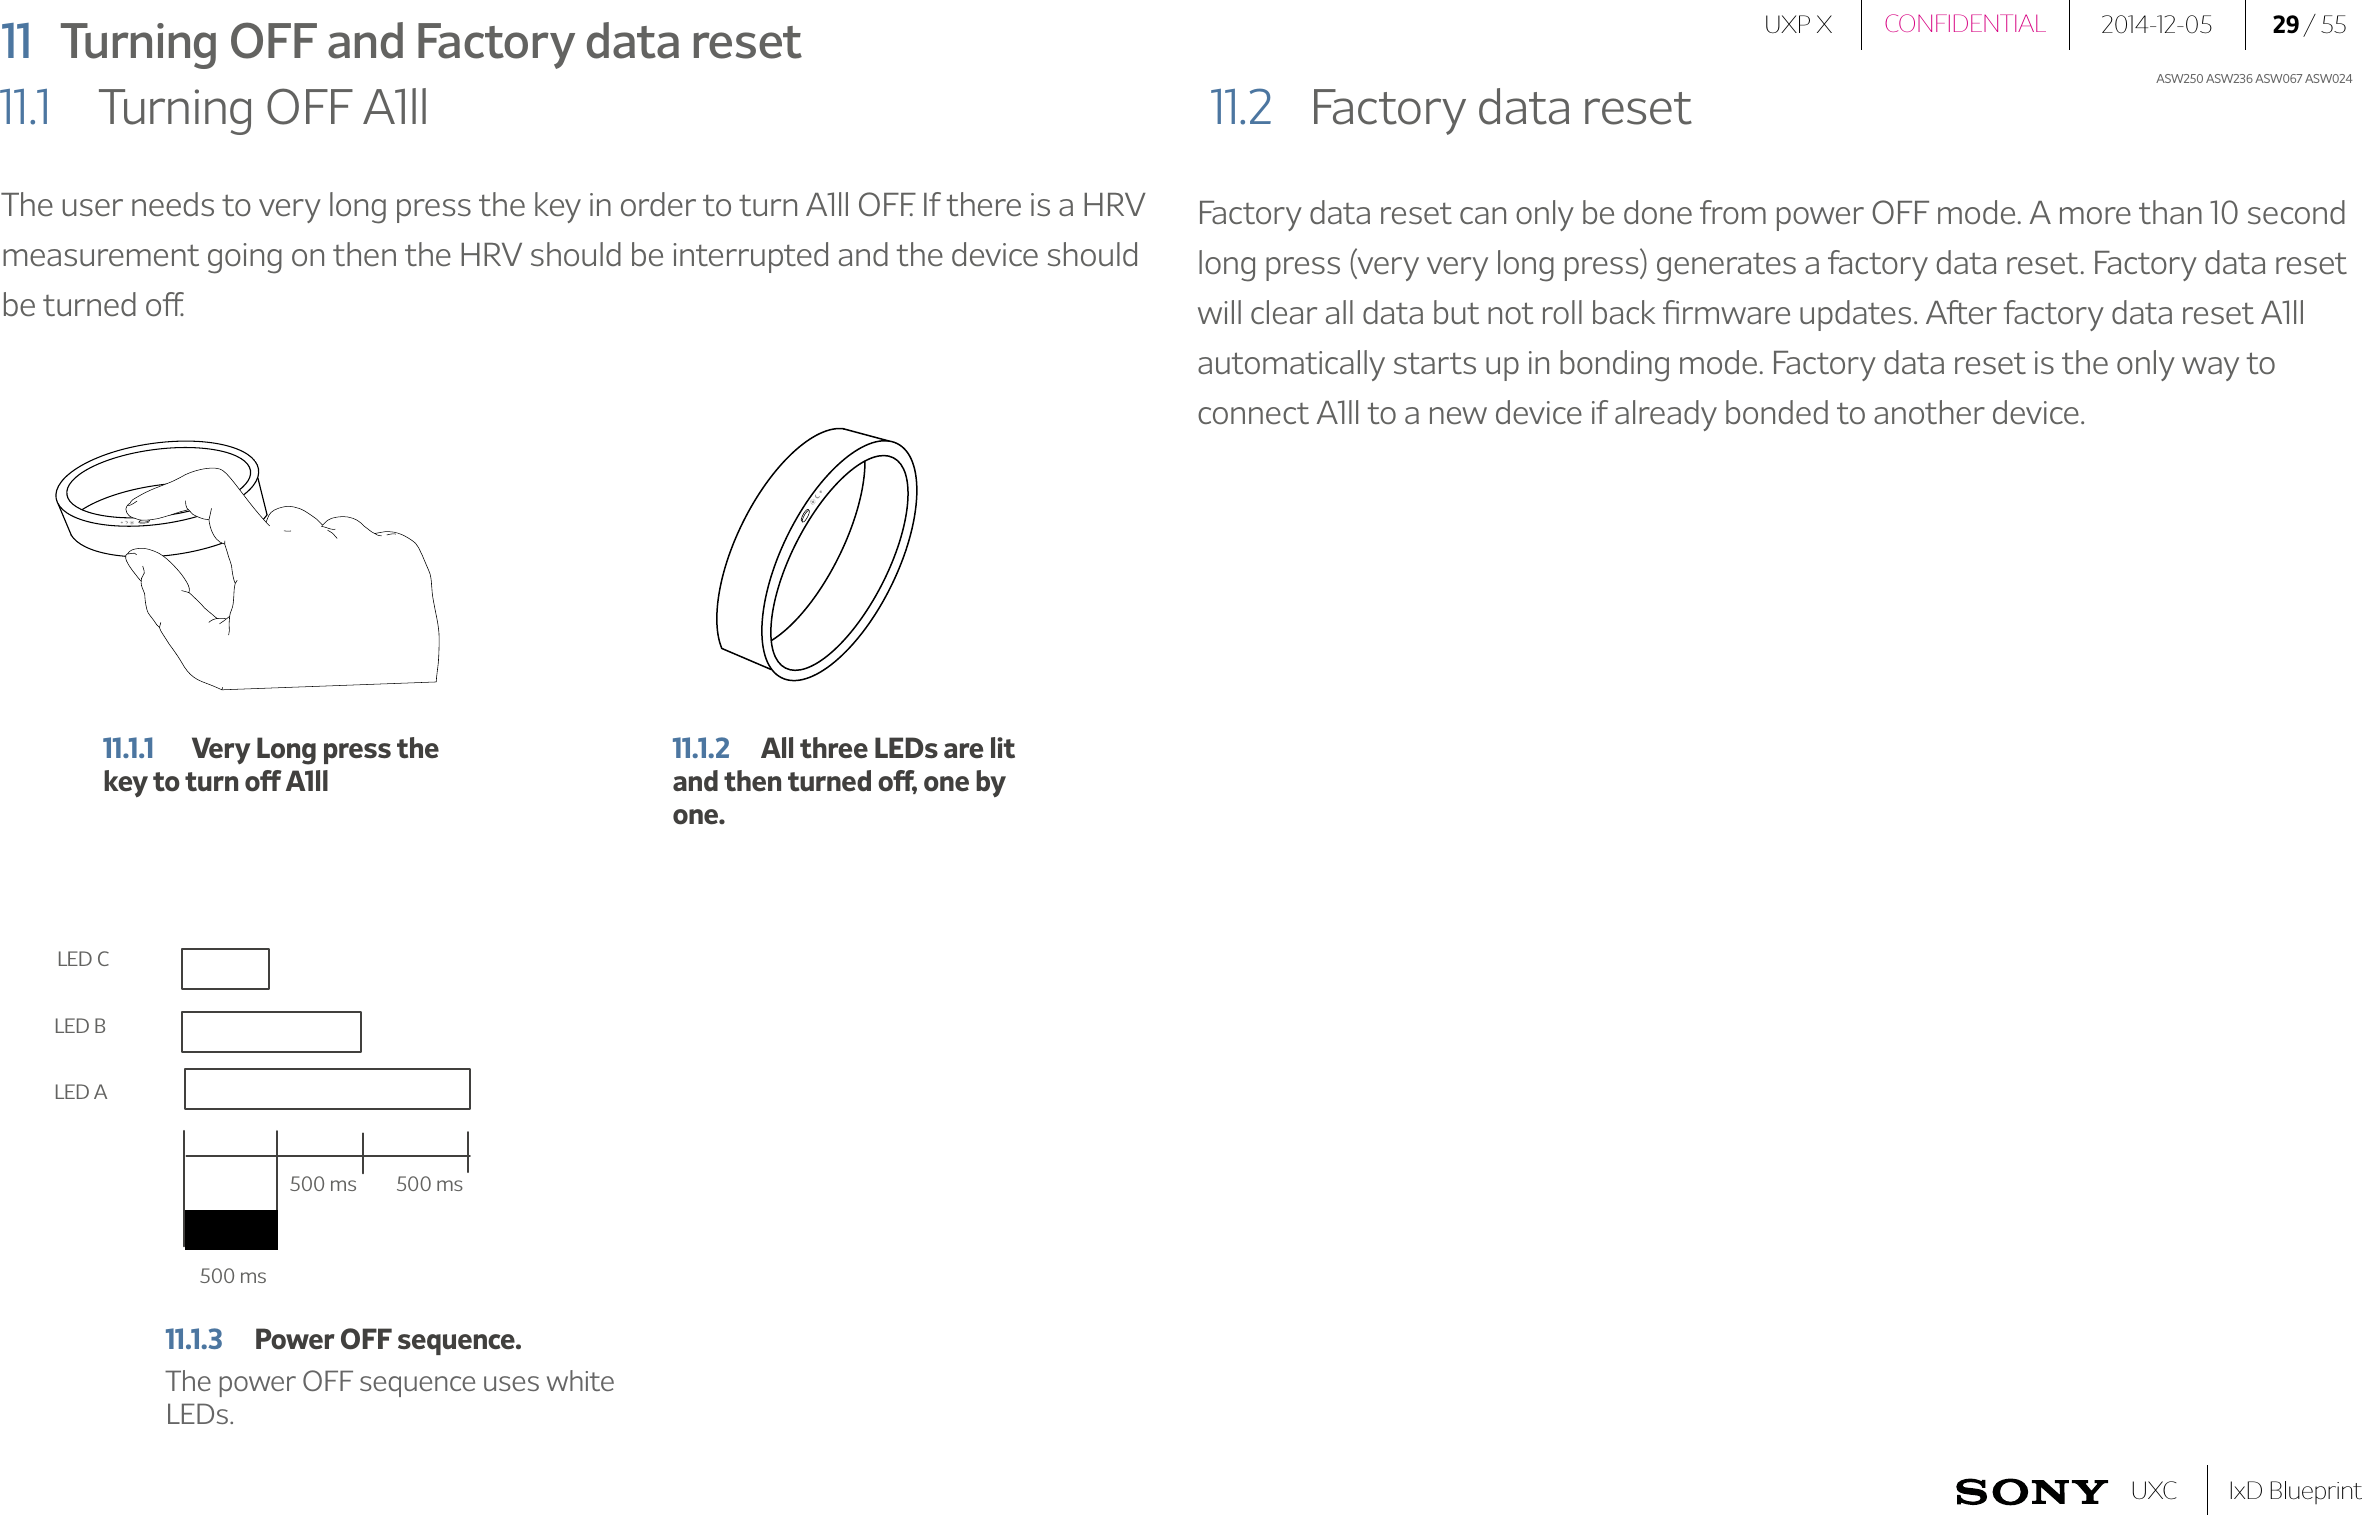 UXP X 2014-12-05 29 / 55IxD BlueprintUXCCONFIDENTIALASW250 ASW236 ASW067 ASW02411  Turning OFF and Factory data reset11.1   Turning OFF A1ll 11.2   Factory data resetThe user needs to very long press the key in order to turn A1ll OFF. If there is a HRV measurement going on then the HRV should be interrupted and the device should be turned off.Factory data reset can only be done from power OFF mode. A more than 10 second long press (very very long press) generates a factory data reset. Factory data reset will clear all data but not roll back ﬁrmware updates. After factory data reset A1ll automatically starts up in bonding mode. Factory data reset is the only way to connect A1ll to a new device if already bonded to another device.11.1.1  Very Long press the key to turn off A1ll500 ms500 ms500 msLED CLED ALED B11.1.2  All three LEDs are lit and then turned off, one by one. 11.1.3  Power OFF sequence.The power OFF sequence uses white LEDs.